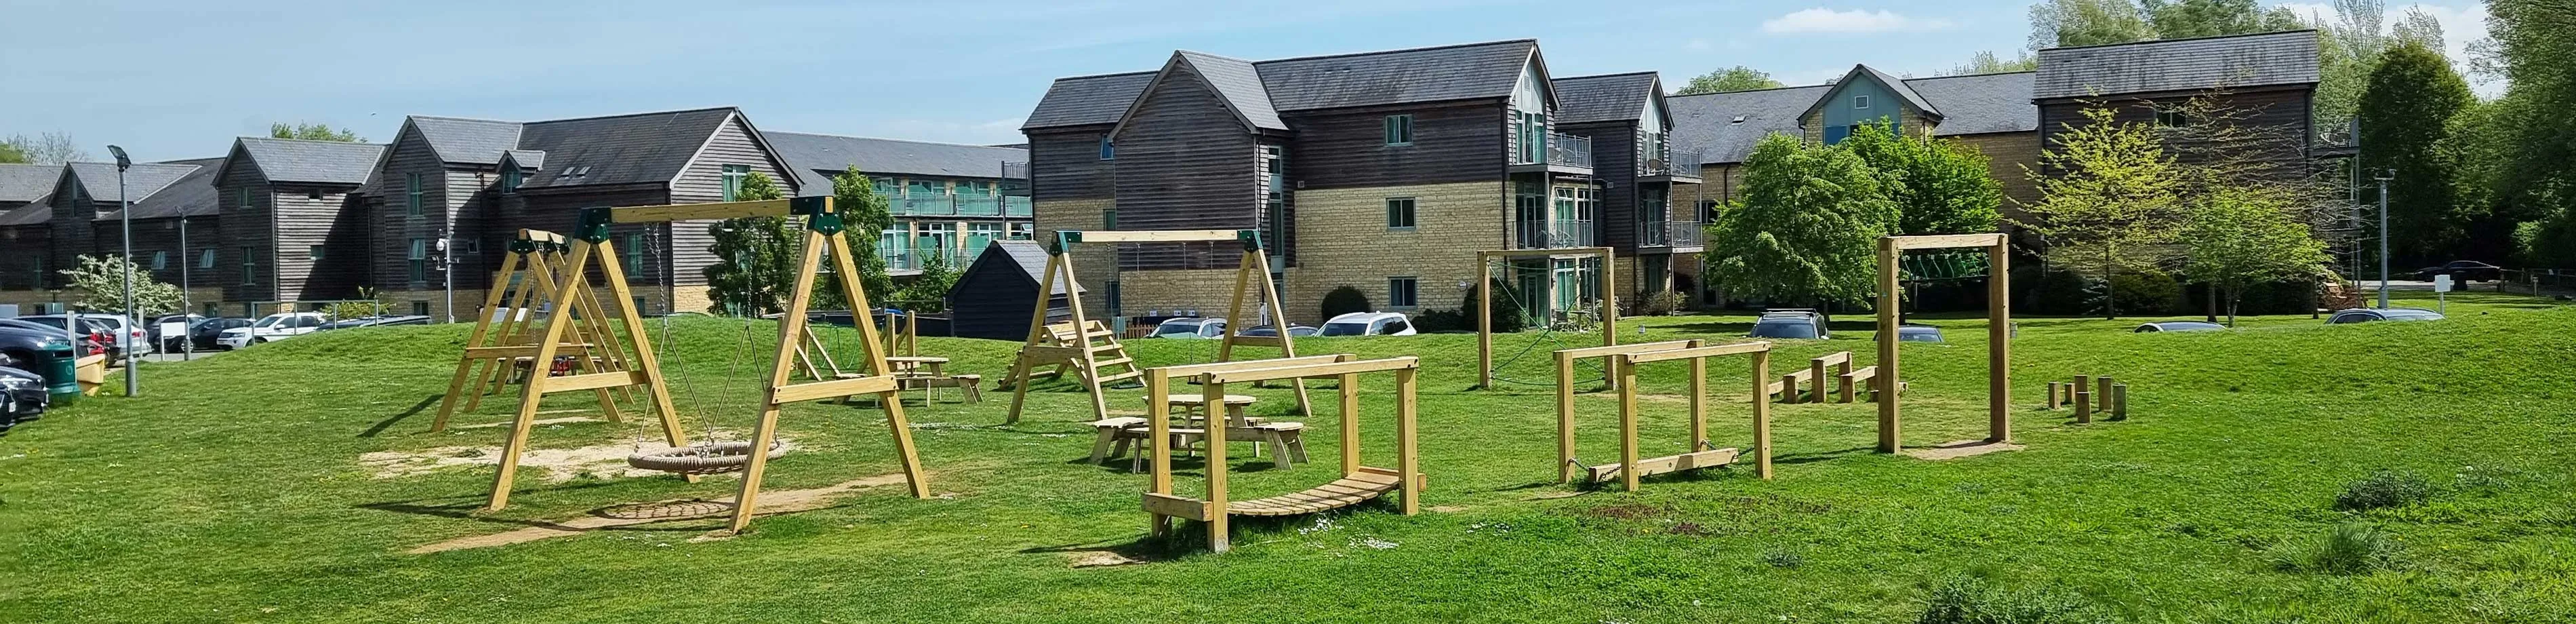 Hotel play area with play trails and swings